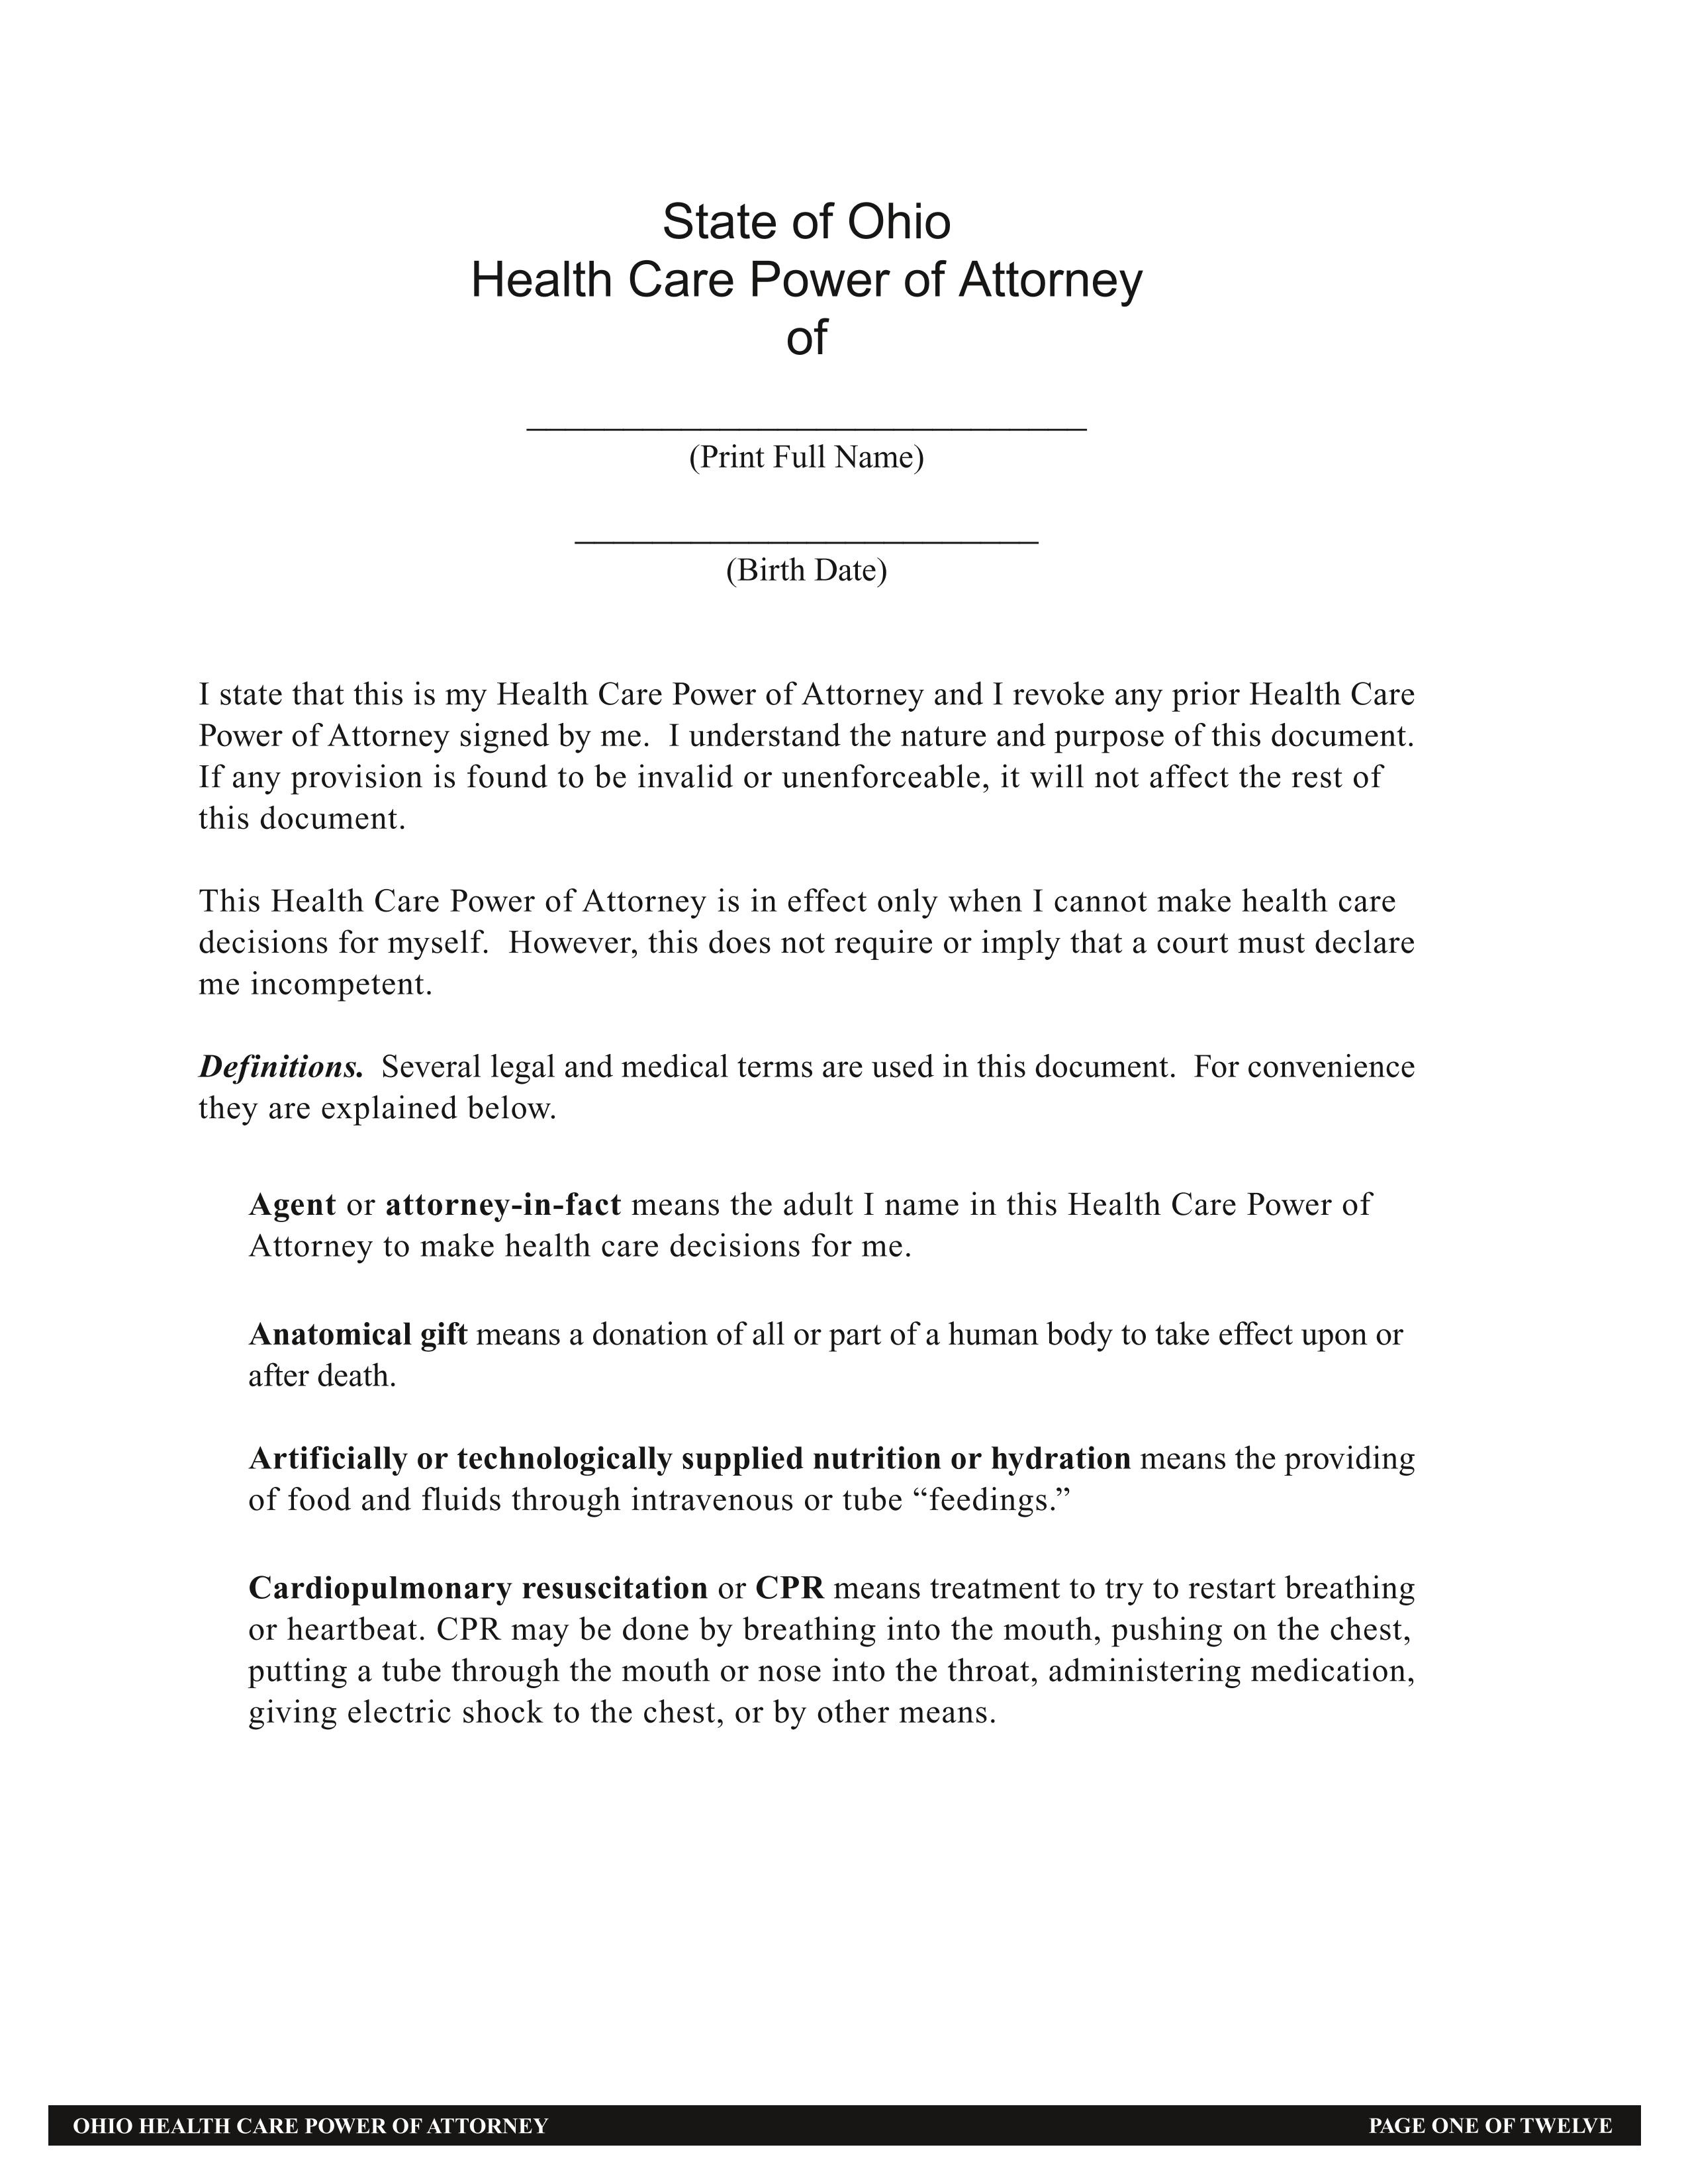 Ohio Durable Power of Attorney for Health Care